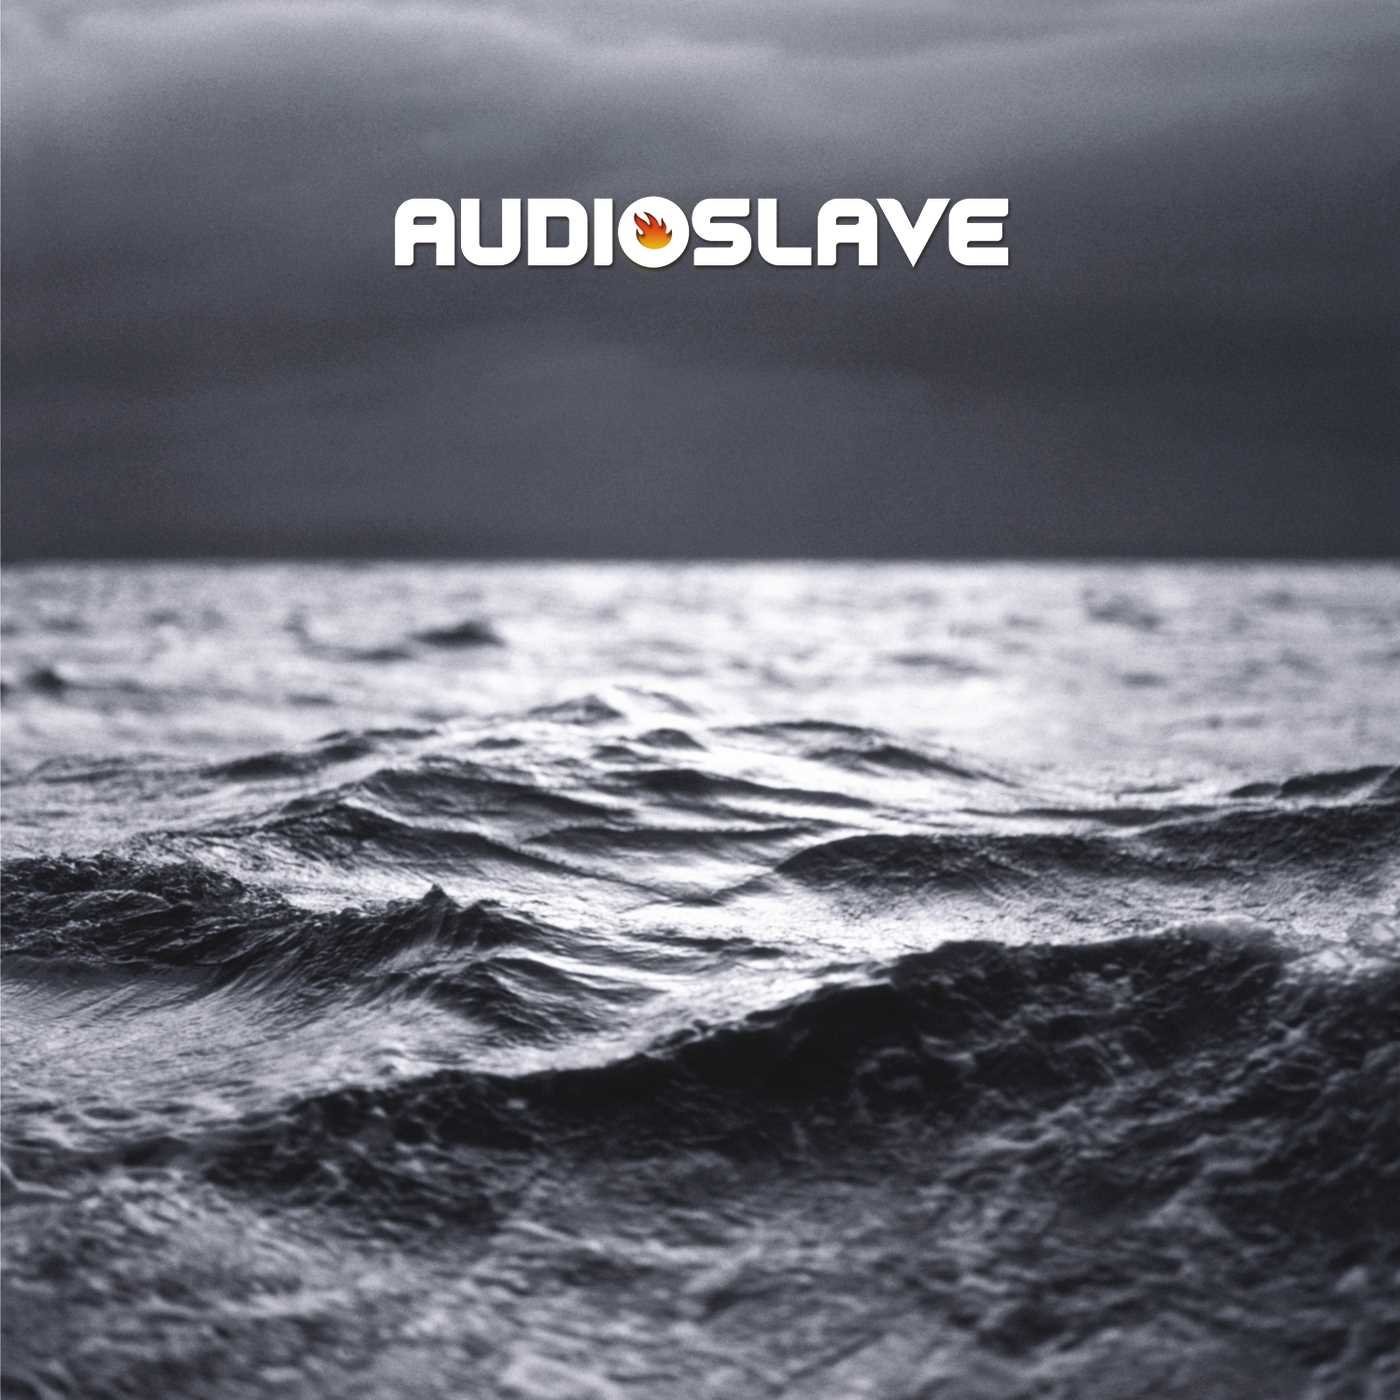 Art for Man Or Animal by Audioslave